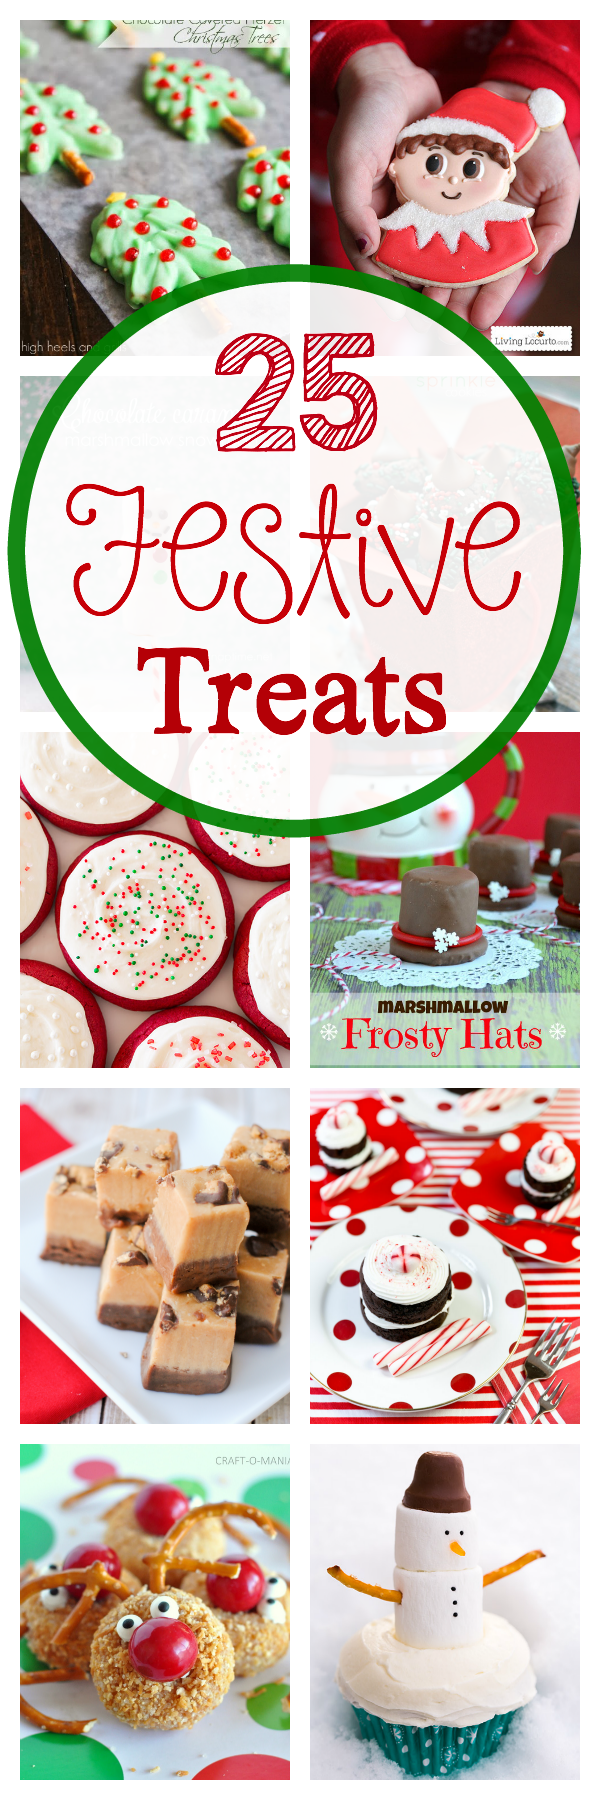 25 Festive Christmas Treats to make this holiday season-Everything from Christmas cookies to fudge, cute parfaits to great party food, you're going to want to try all of these! #Christmas #christmastreats #dessert